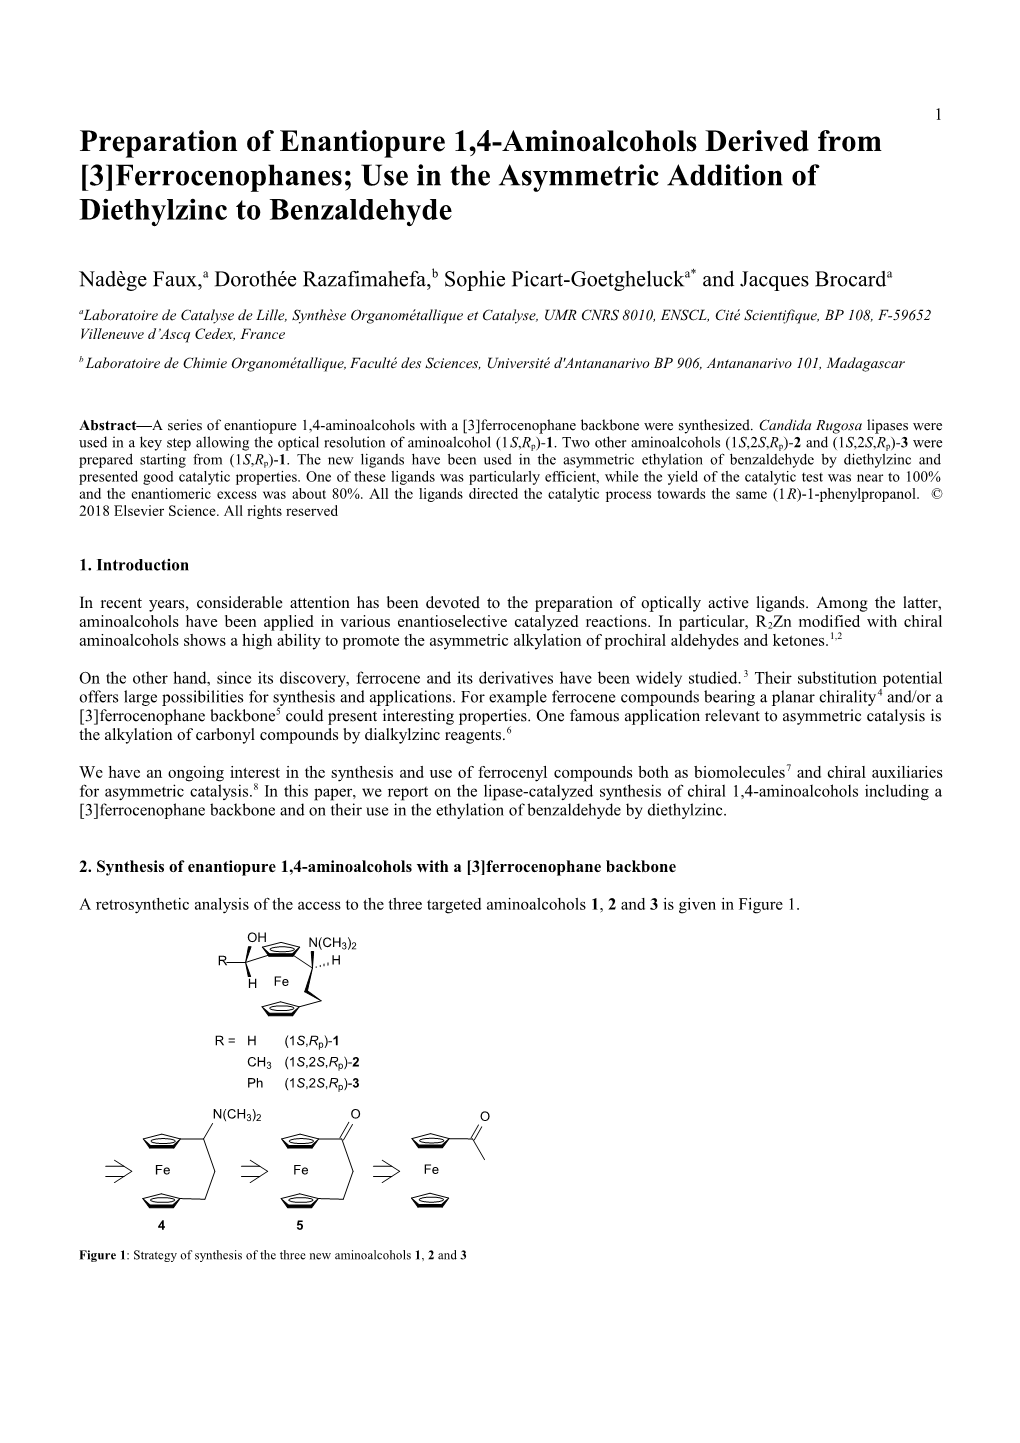 Preparation of Enantiopure 1,4-Aminoalcohols Derived from 3 Ferrocenophanes; Use in The